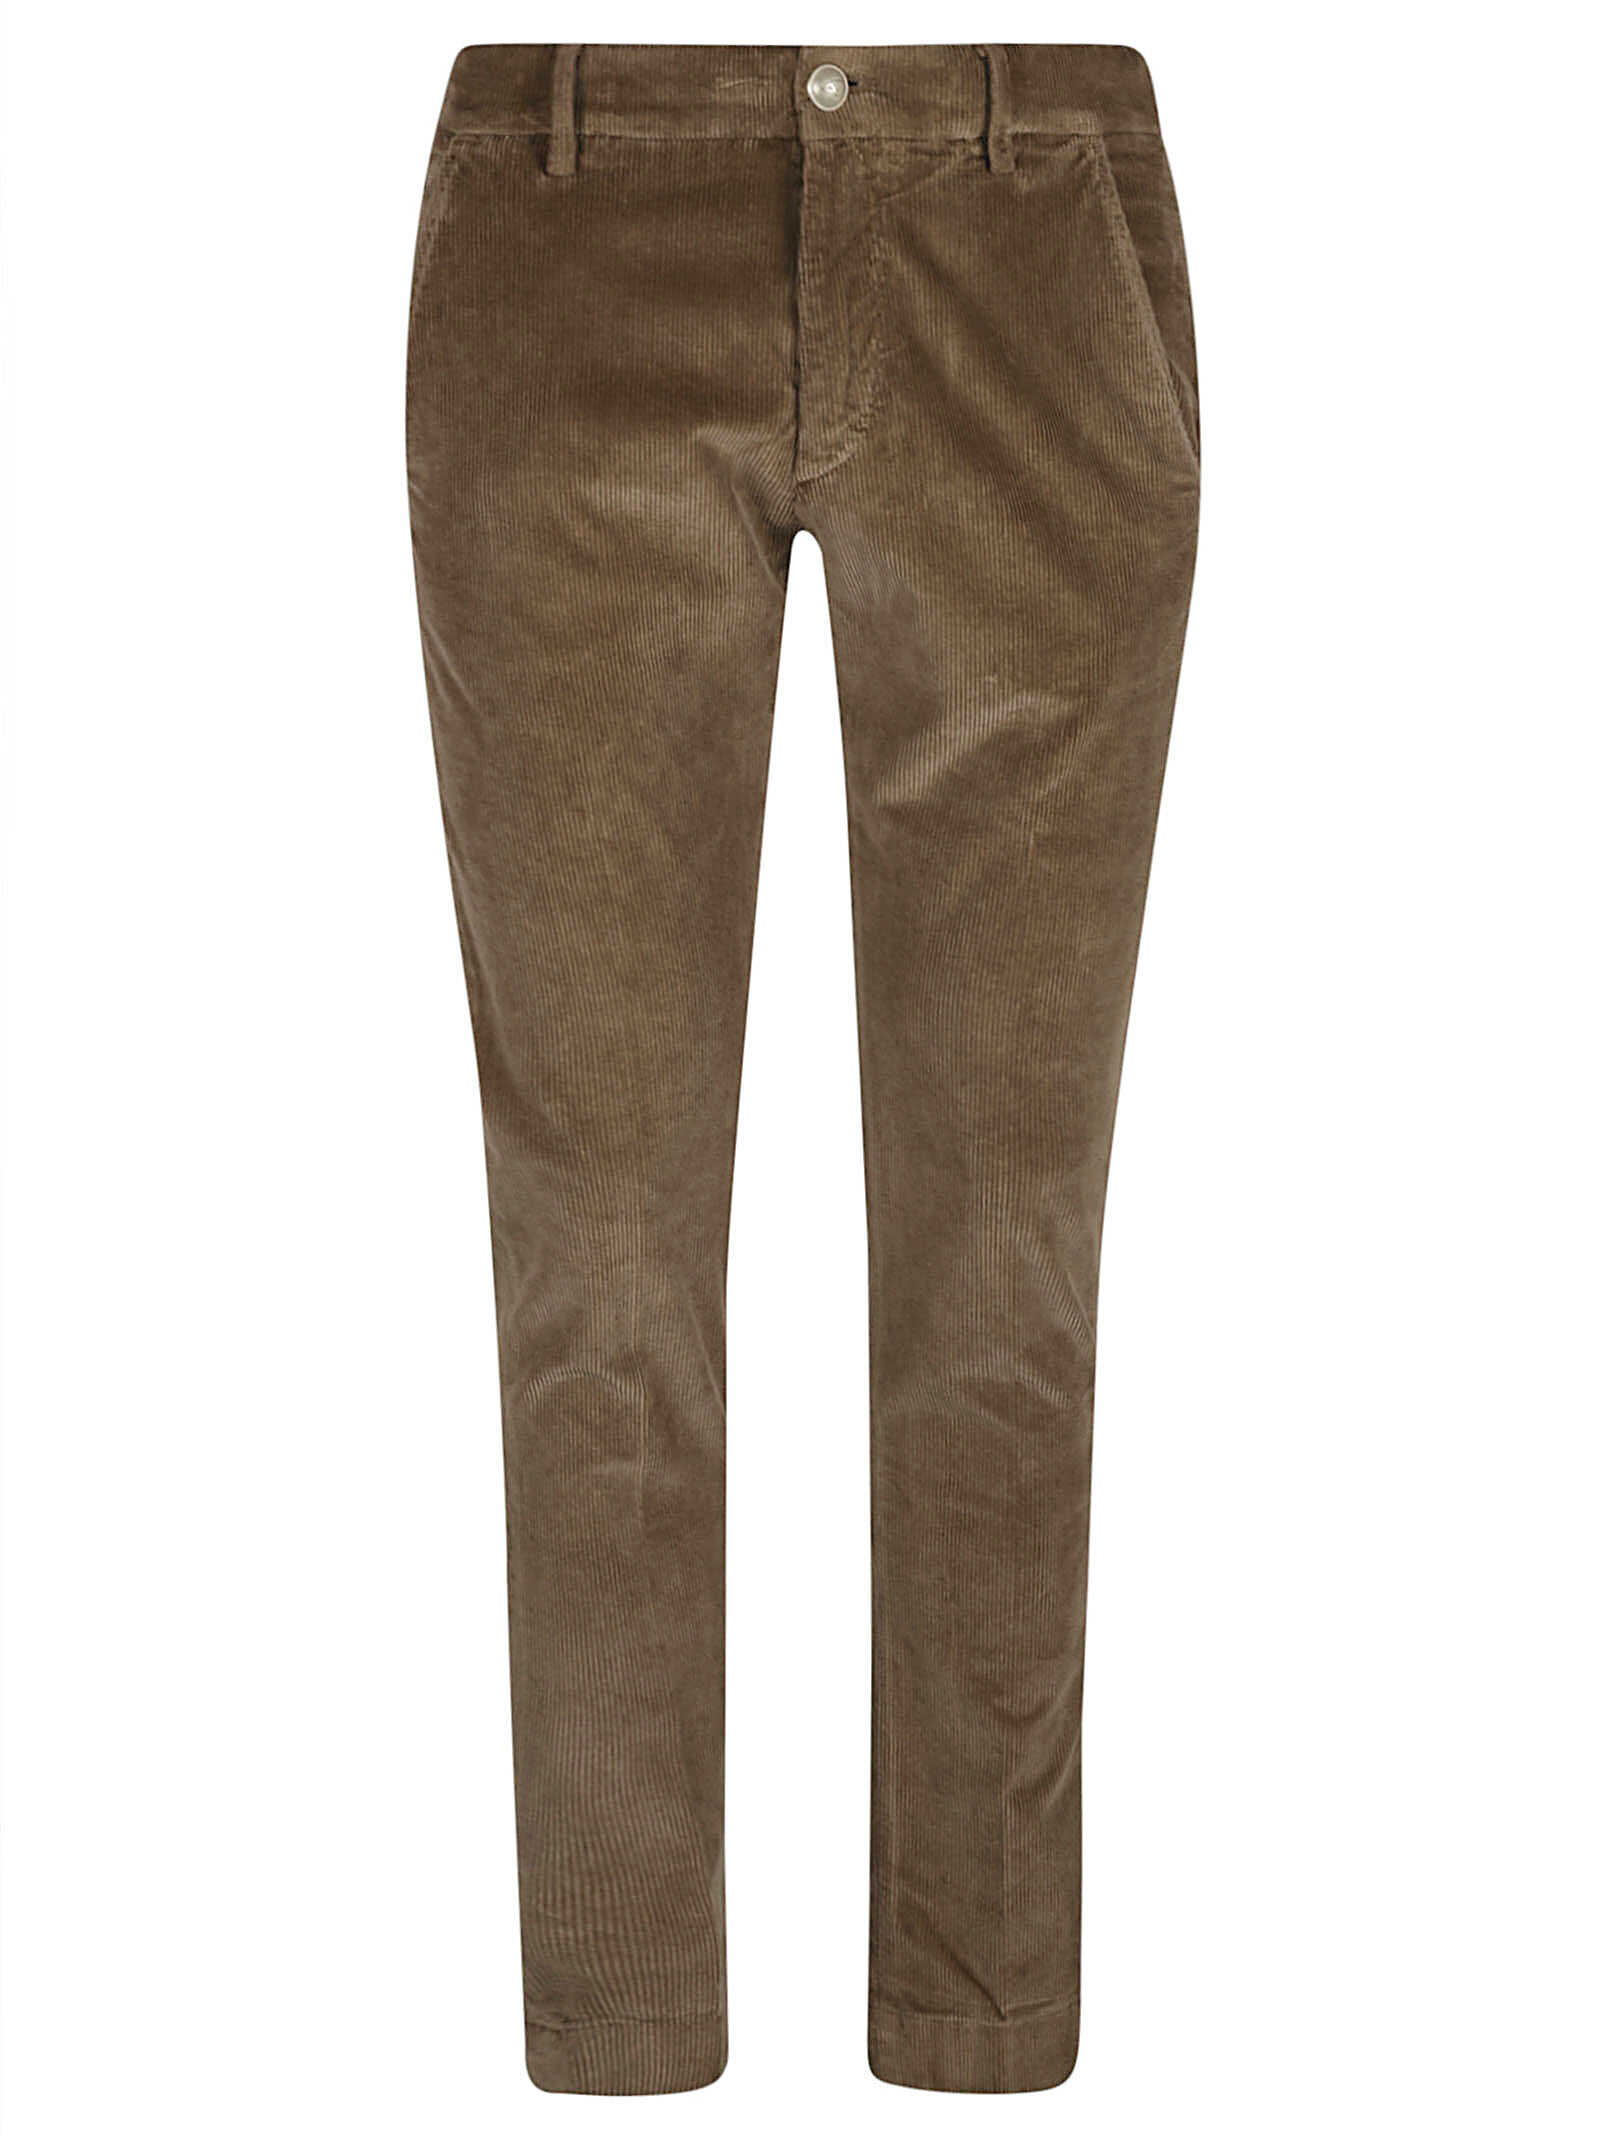 HANDPICKED Hand Picked Trousers N/A